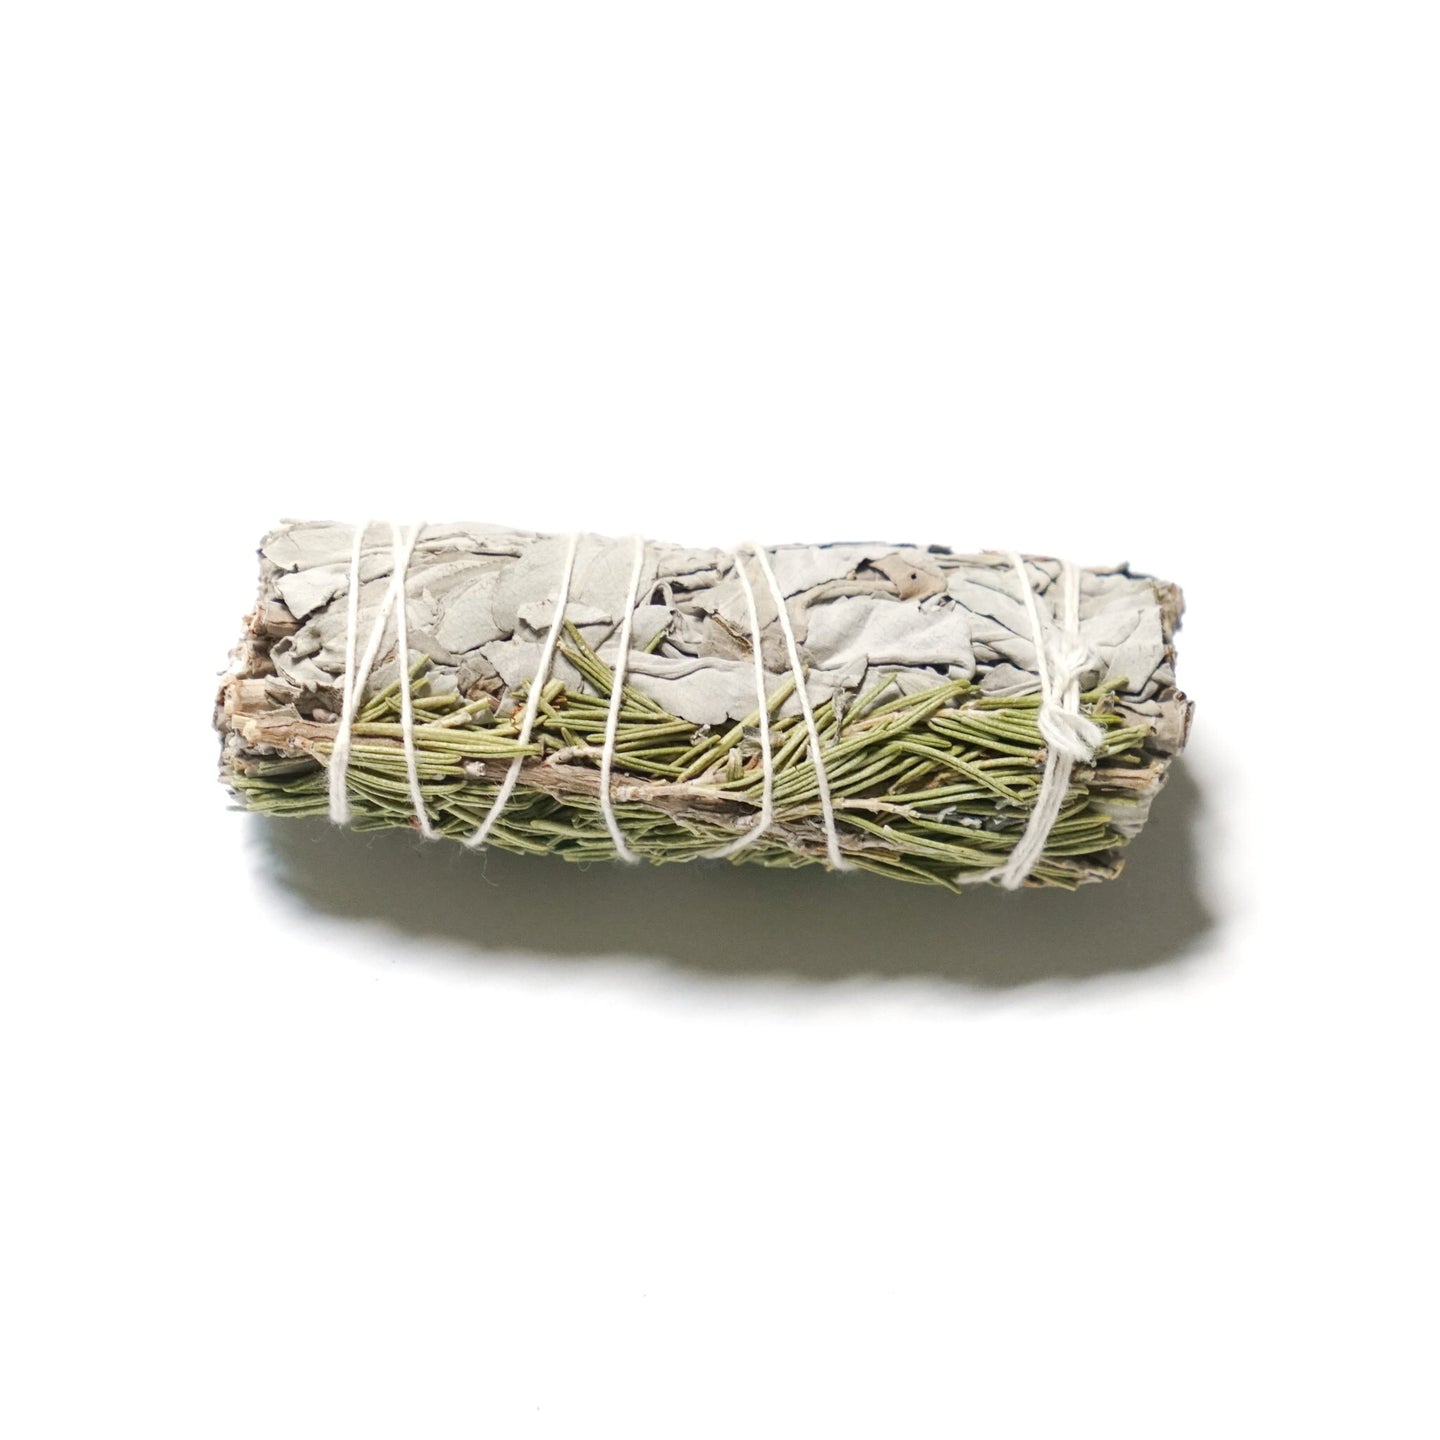 Rosemary and White Sage Smudge Bundle